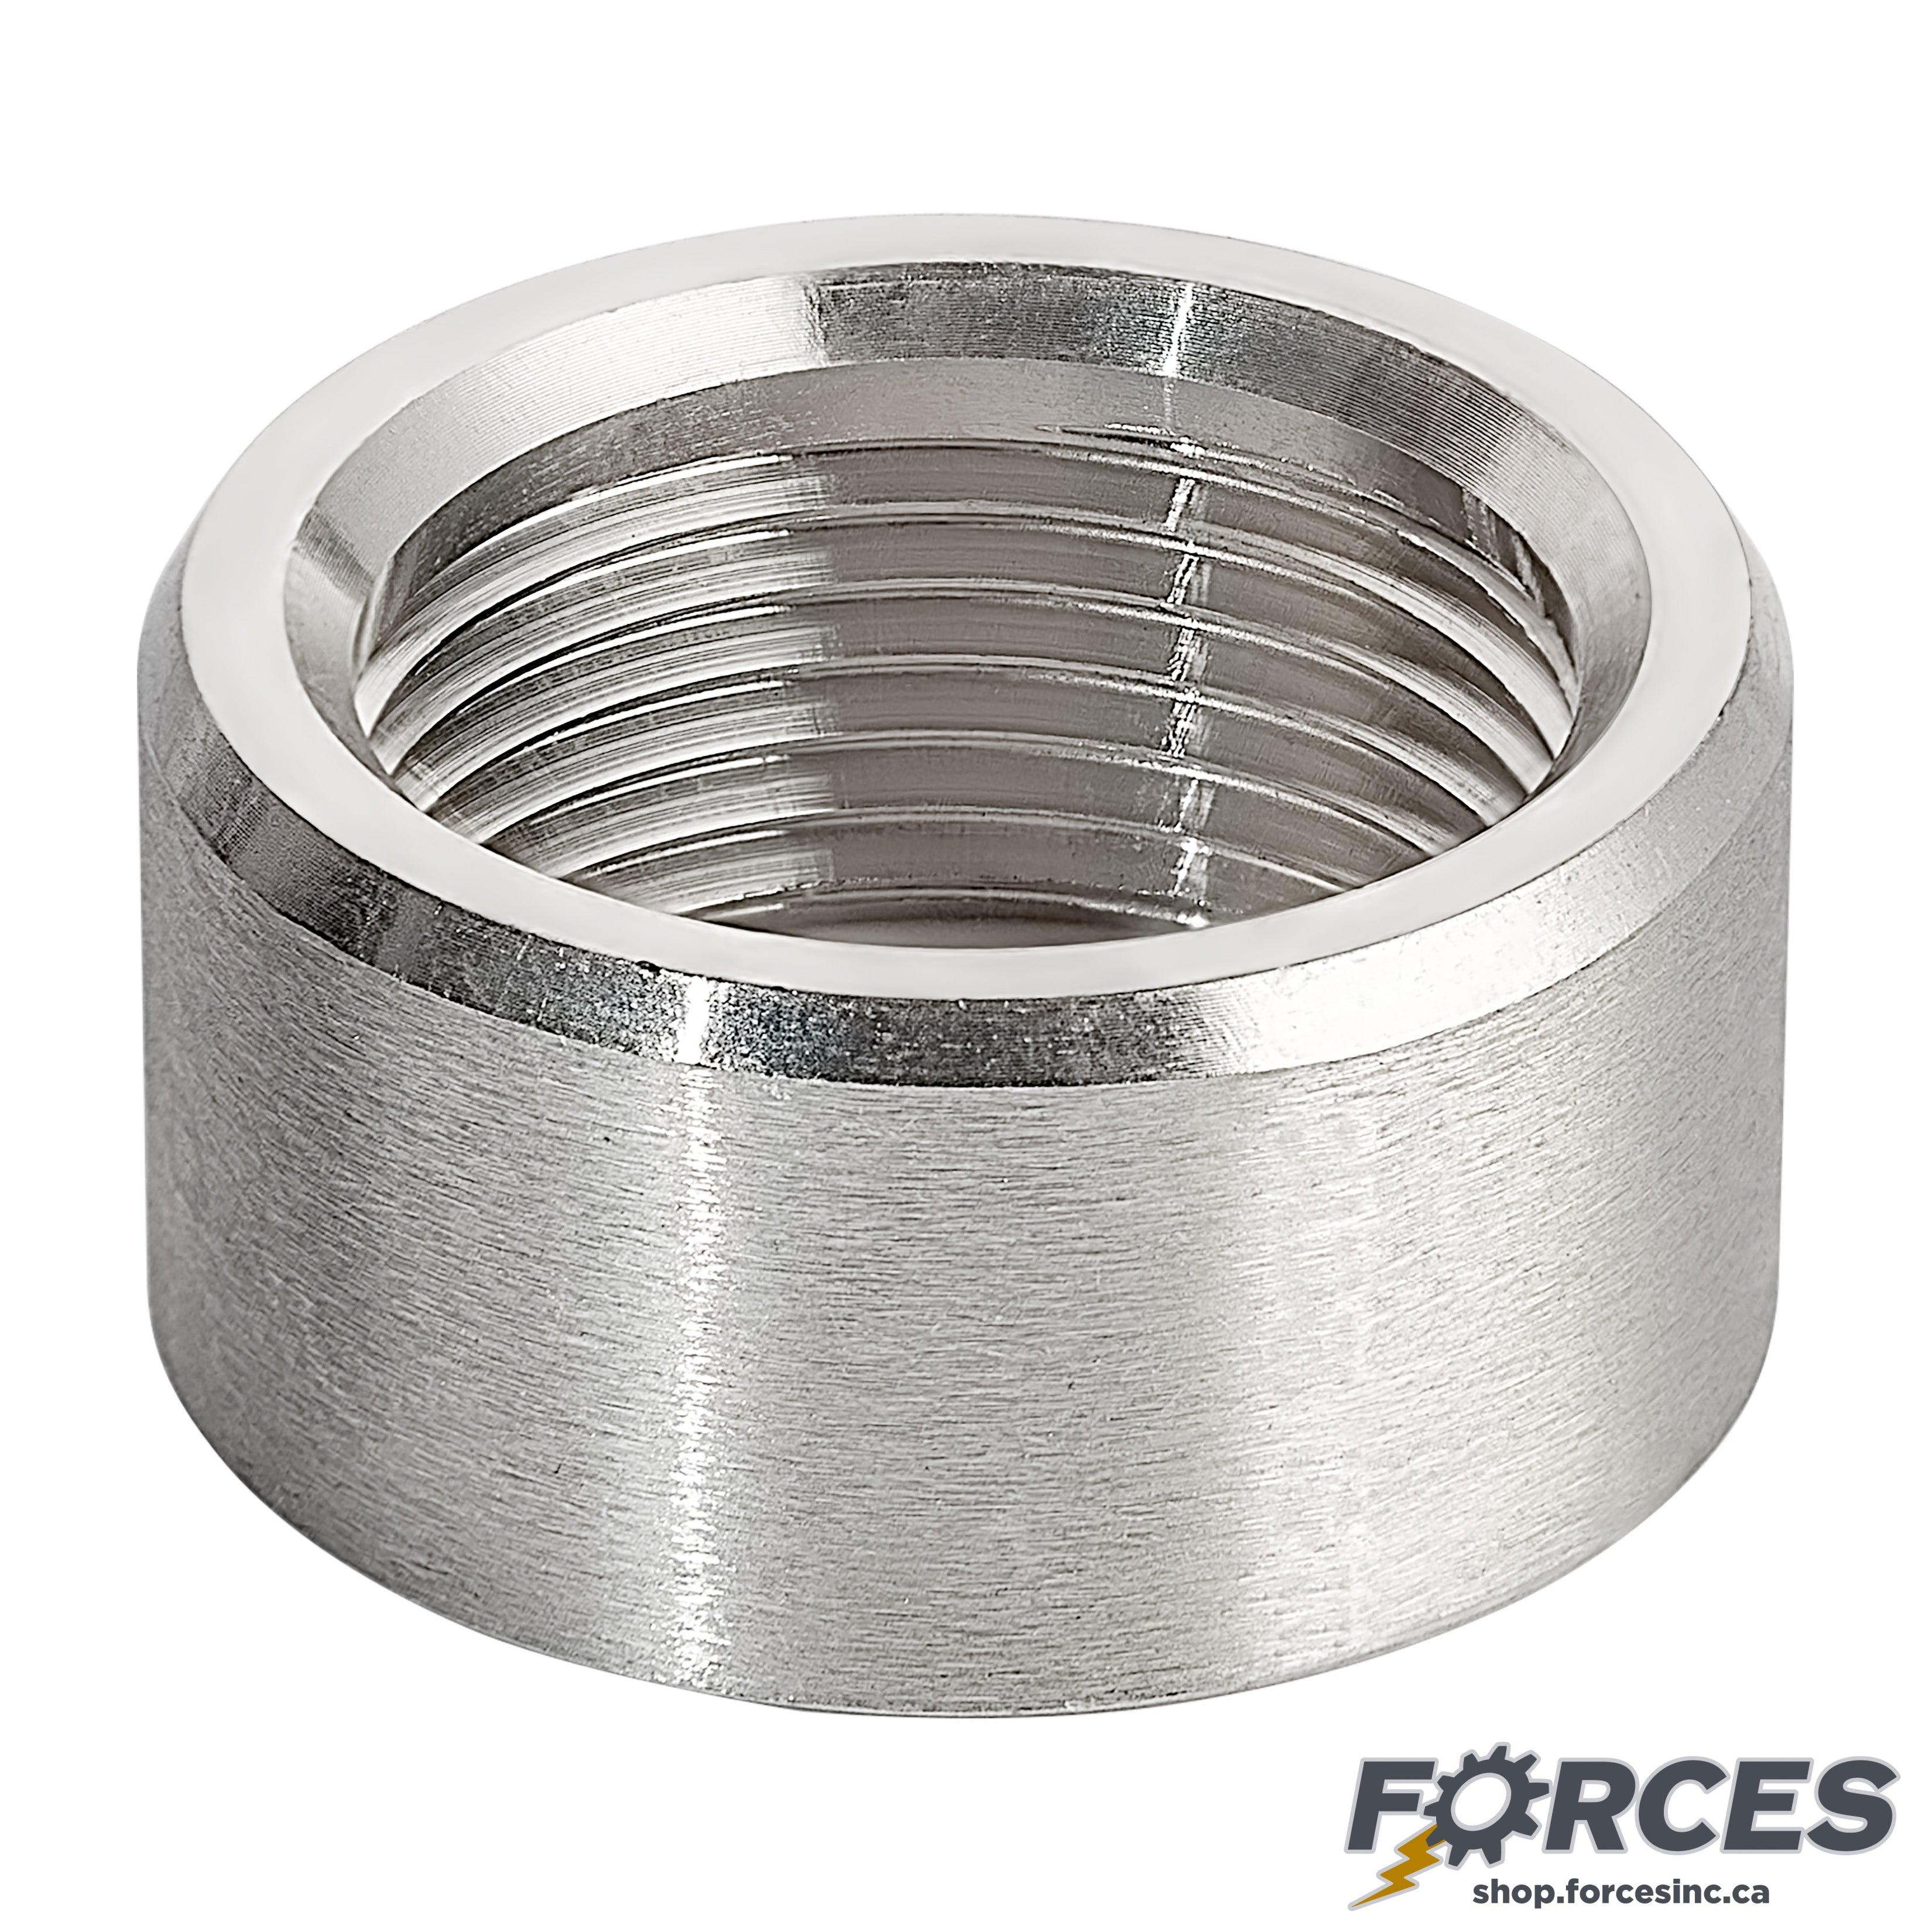 3/8" Half-Coupling NPT #150 - Stainless Steel 316 - Forces Inc